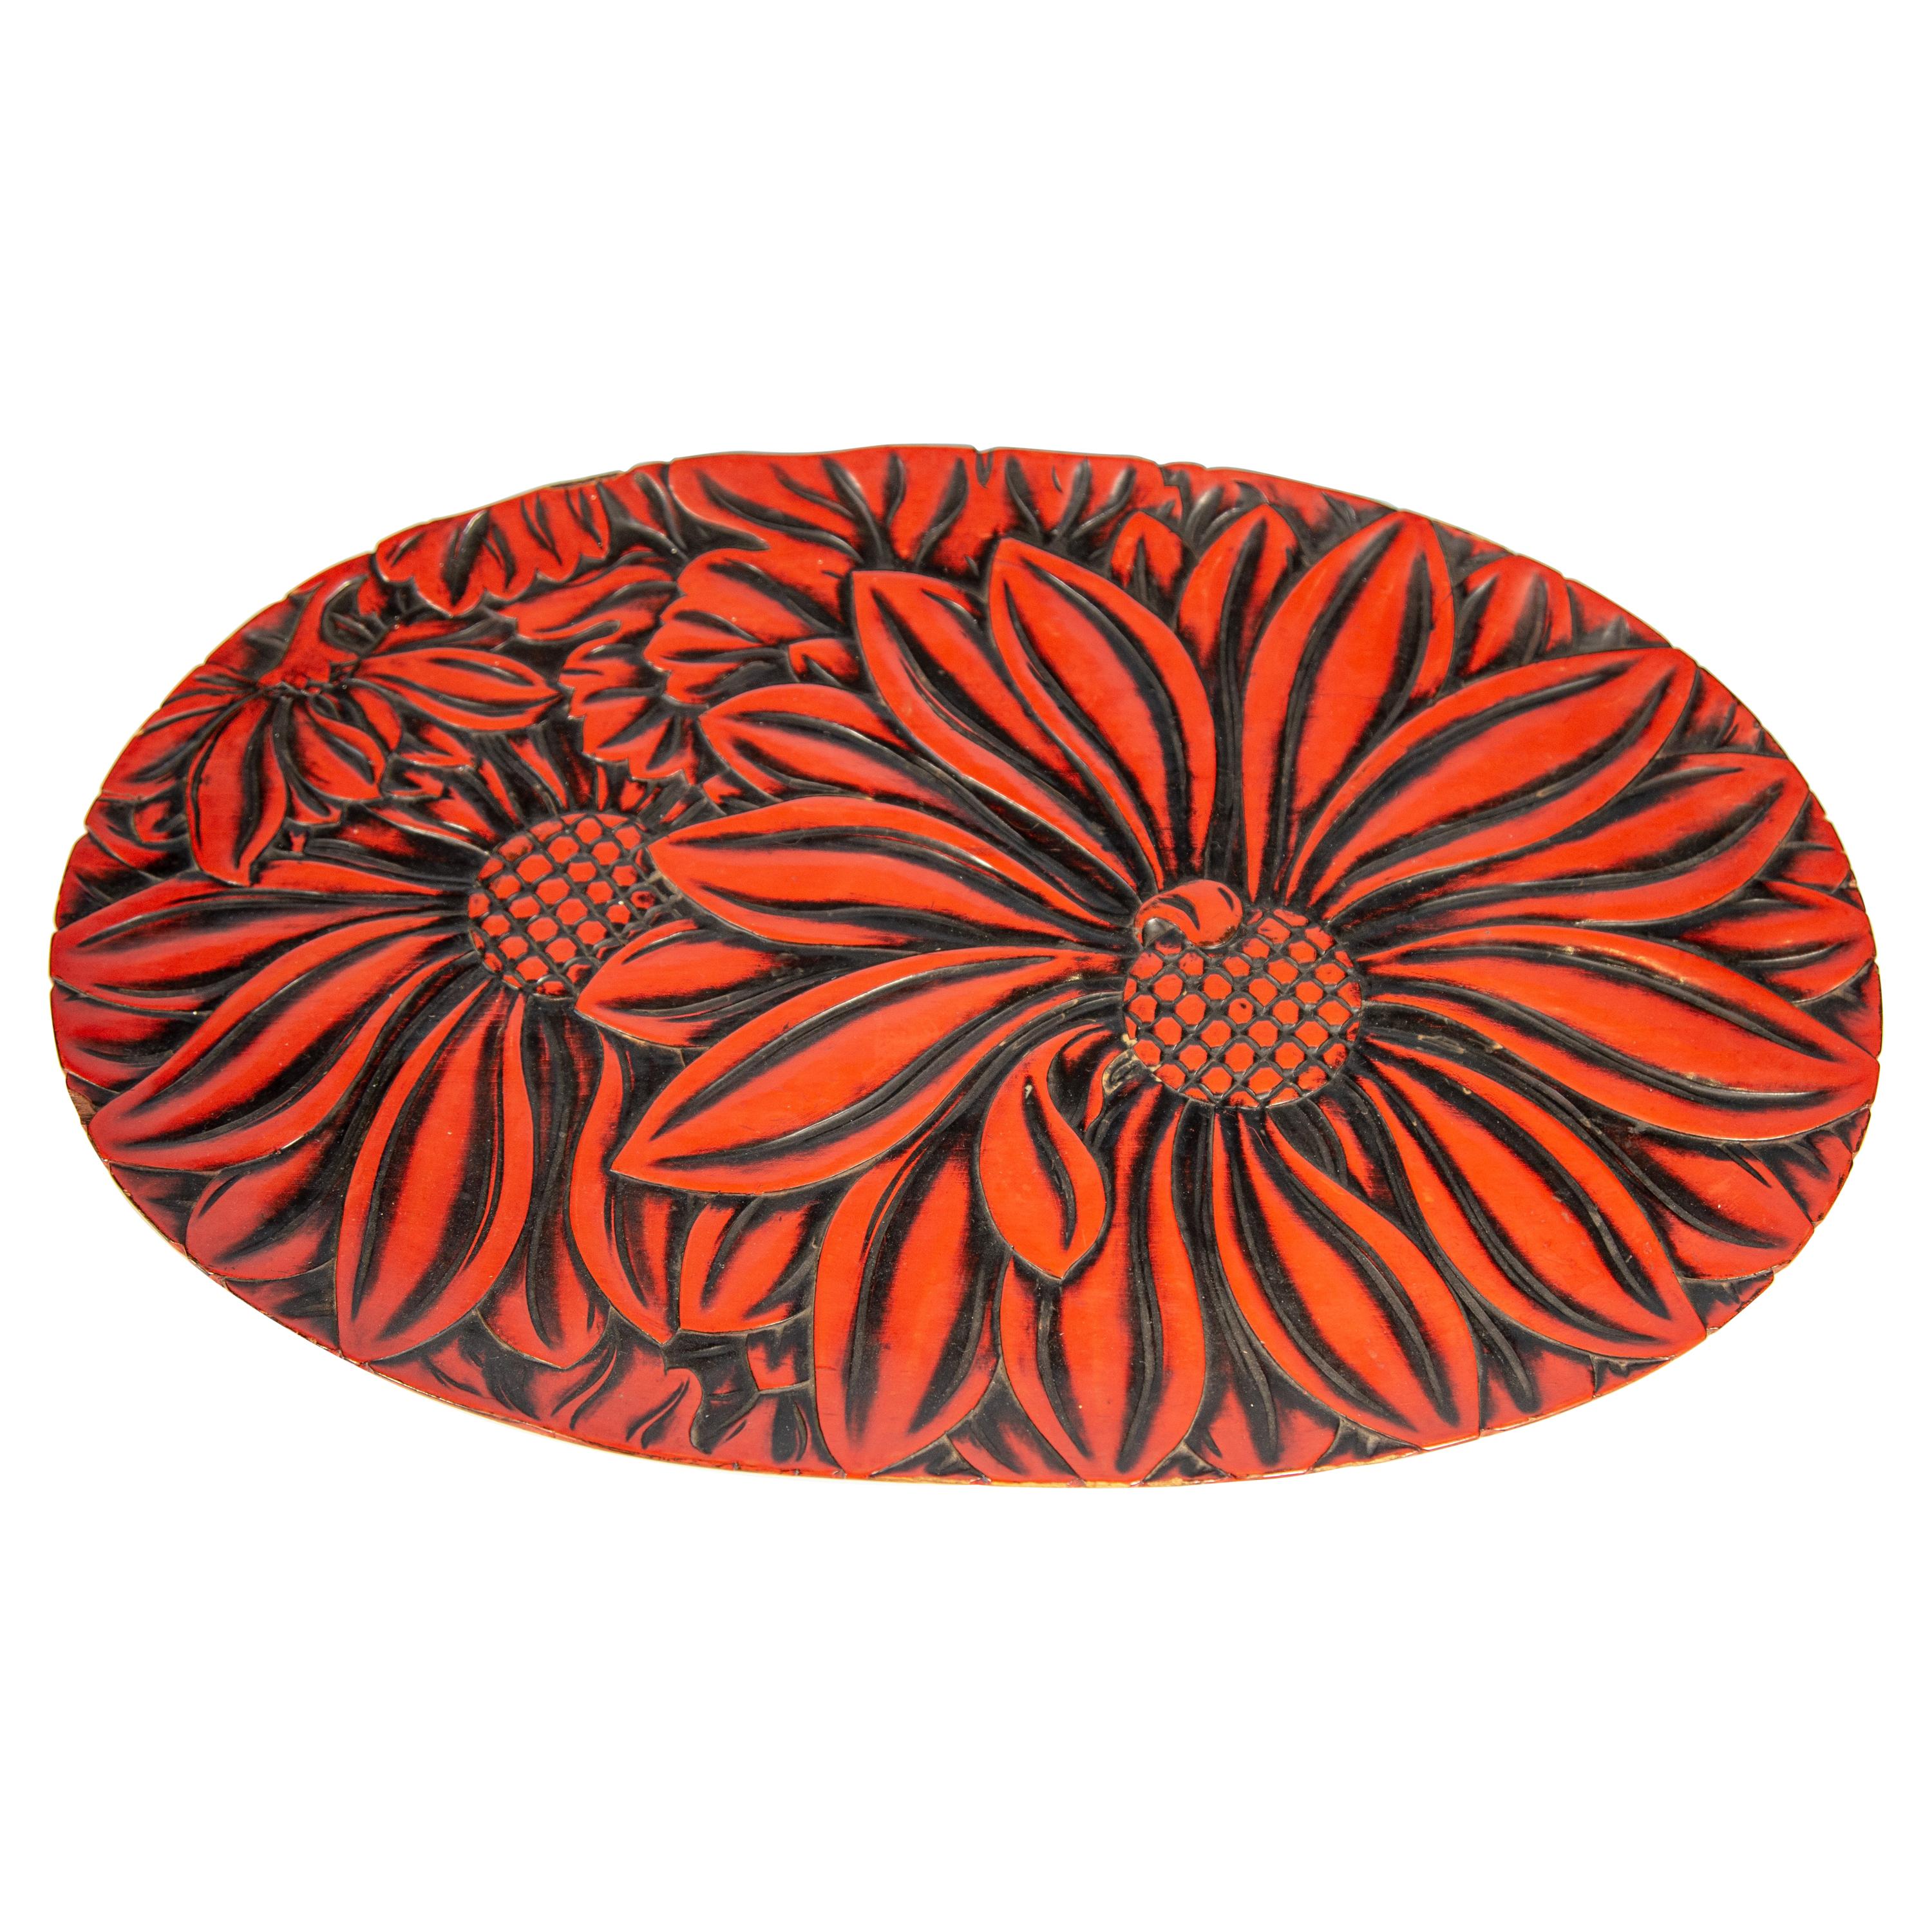 Japanese Carved Wood and Negoro Lacquer Oval Tray, circa 1920